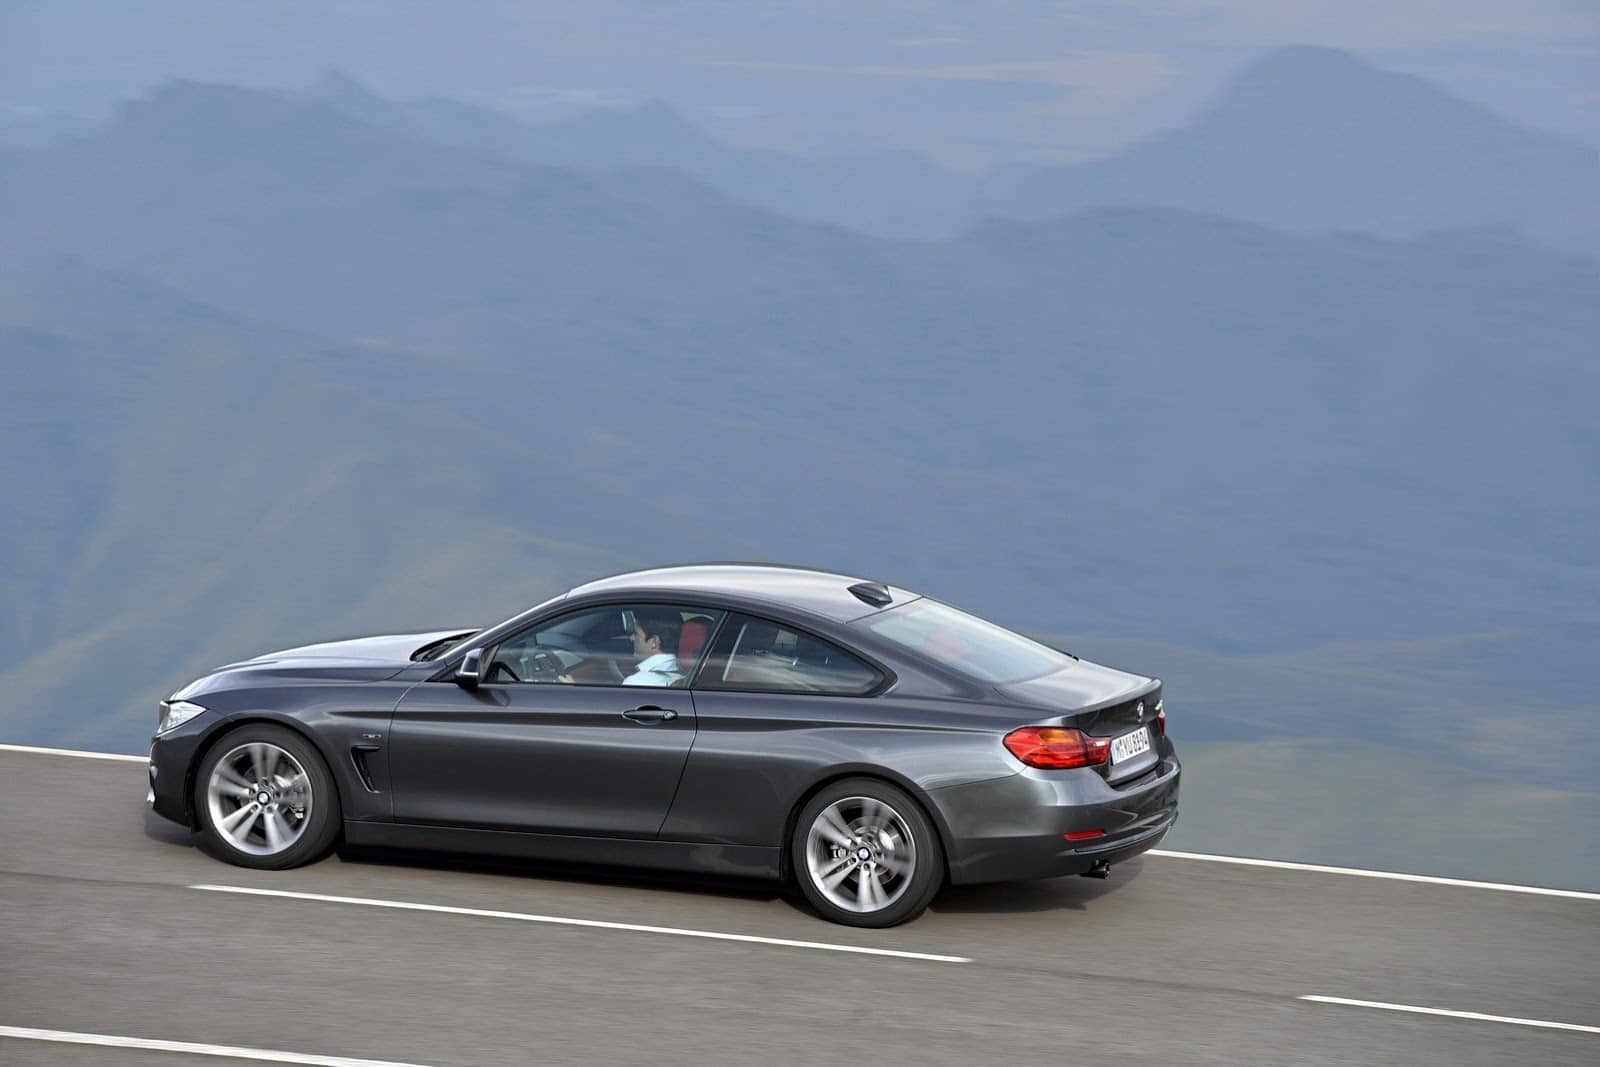 BMW 4-Series Coupe 003